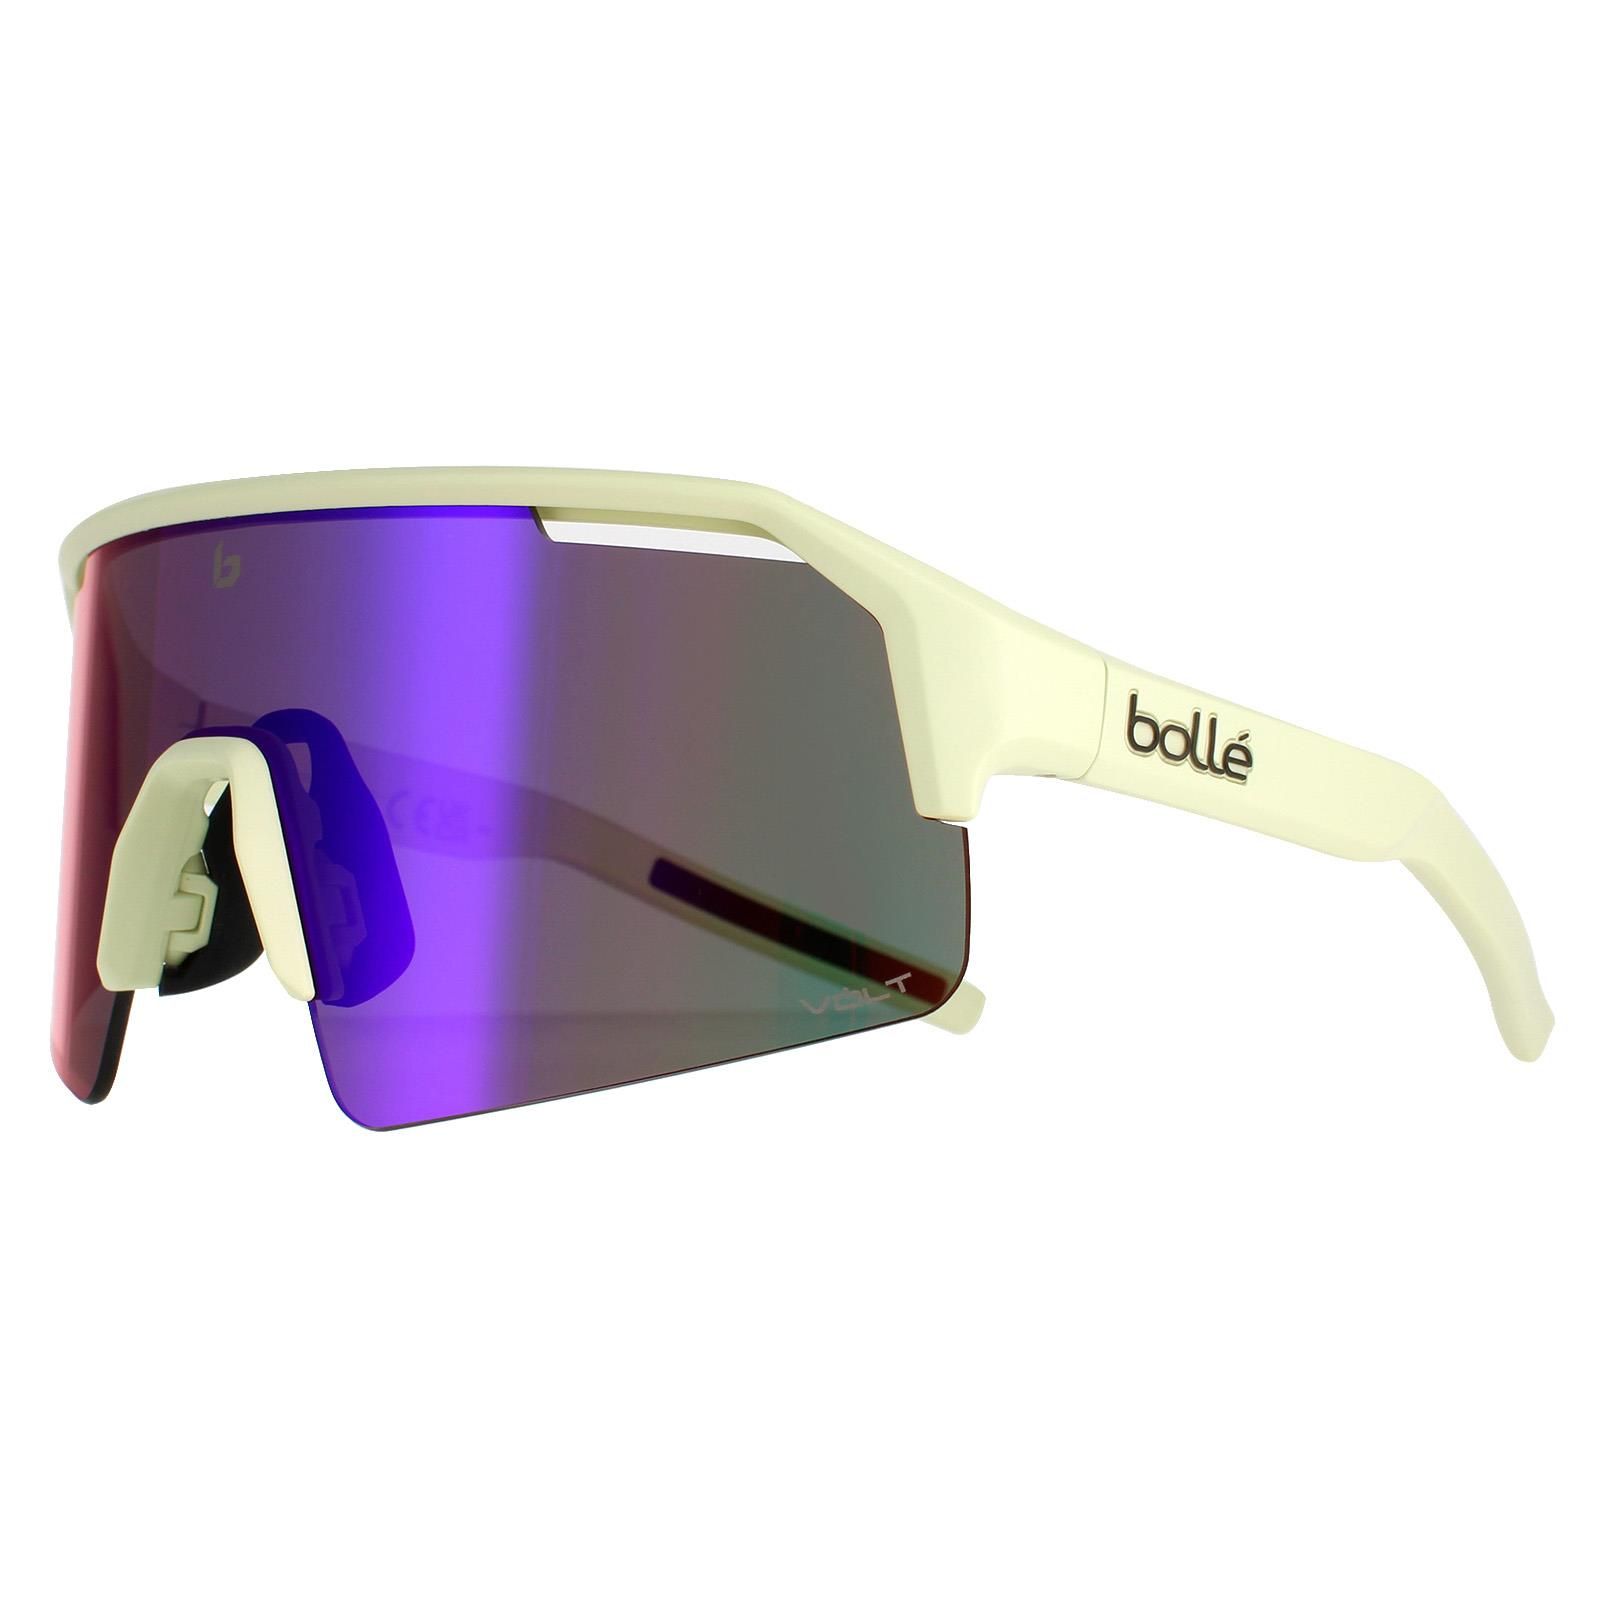 Bolle Shield Unisex Creator Matte Green Volt Ultraviolet C-Shifter  Bolle are from the Bolle performance collection designed for cycling but good for all sports. They have a large shield style lens with extra ventilation.